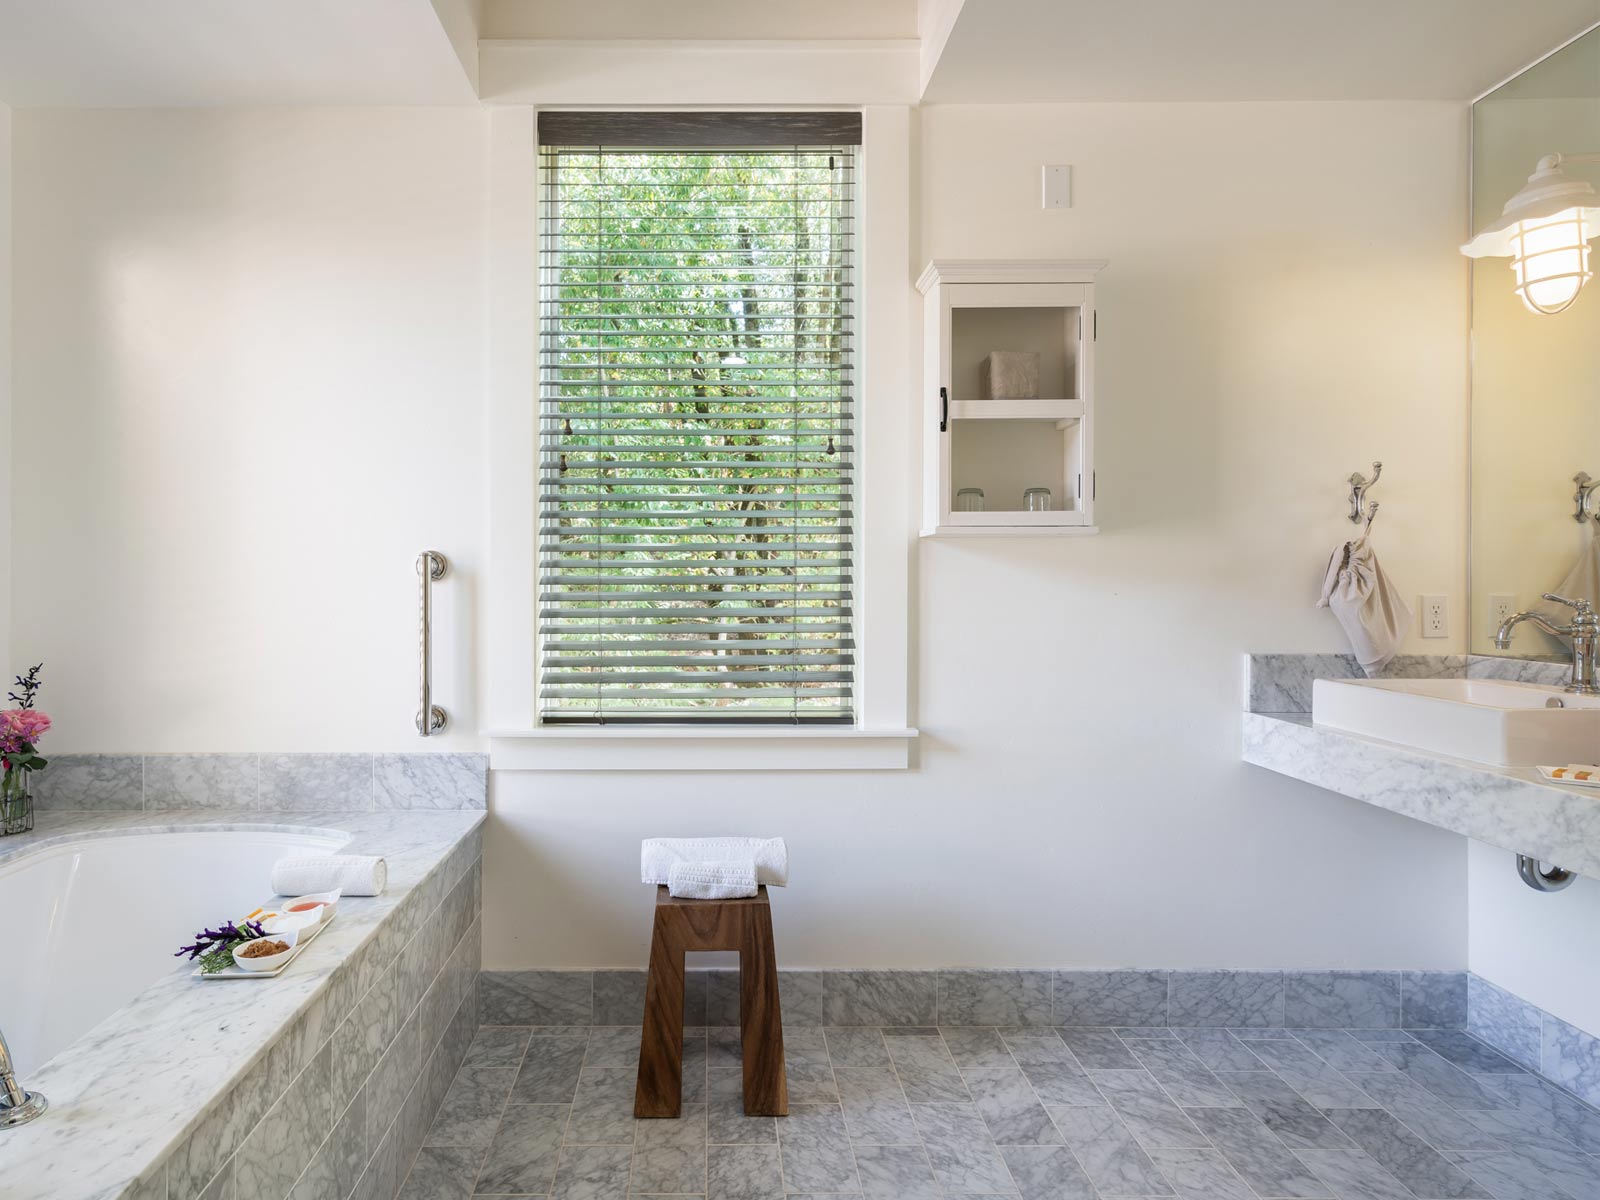 interior of large, elegant bathroom: gray tiled bathtub, matching tiled floors, large vertical glass window, elegant sink and mirror to the right. looking out to greenery,